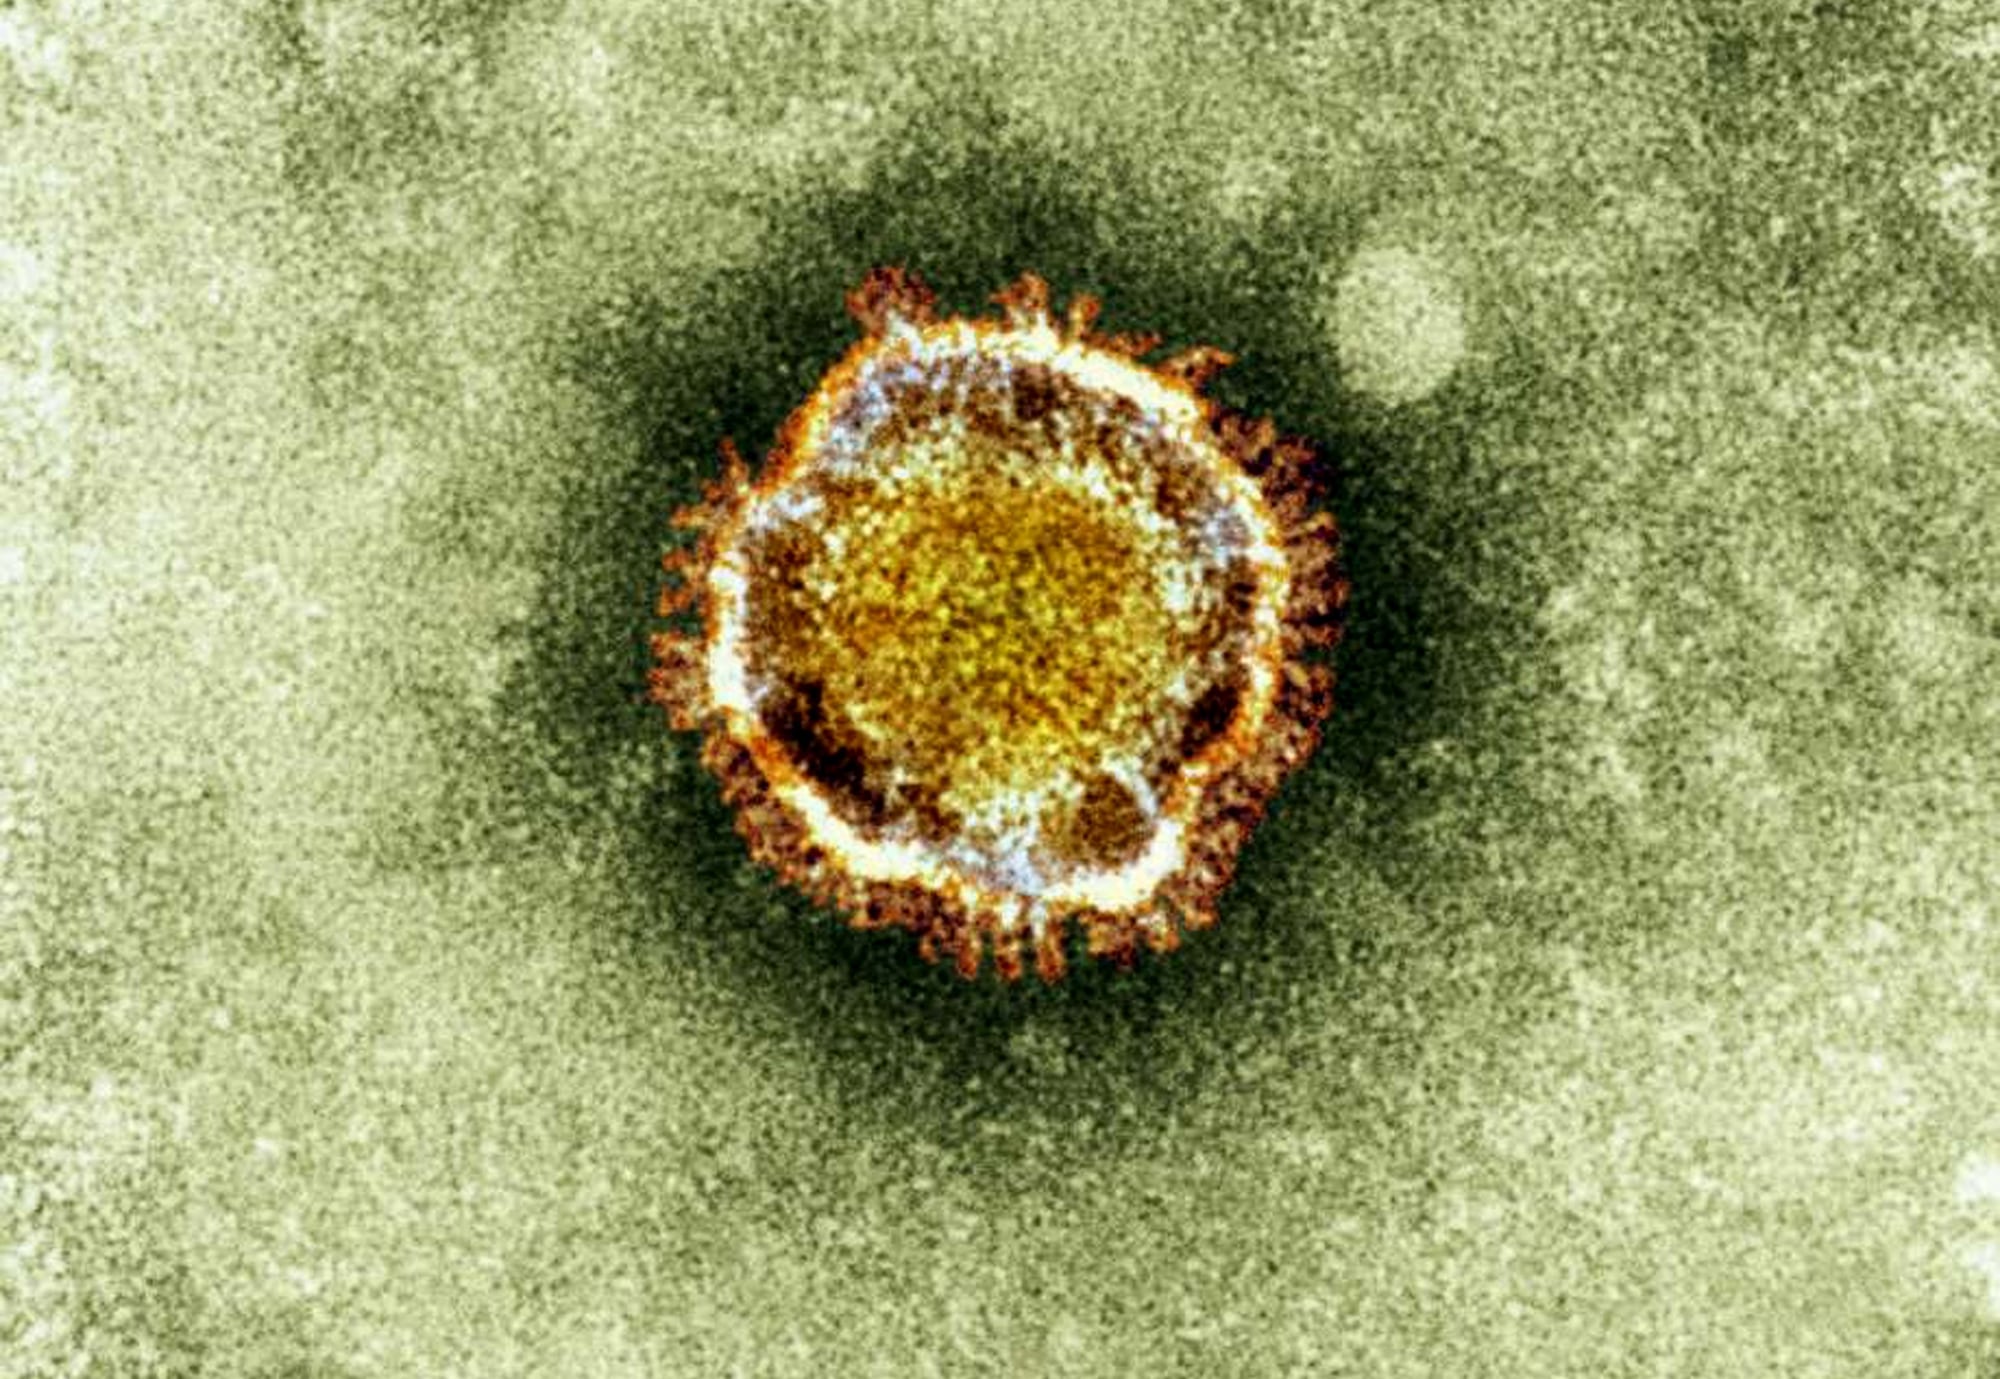 An electron microscope image of a coronavirus, part of a family of viruses that cause ailments including the common cold and SARS, which was first identified last year in the Middle East.